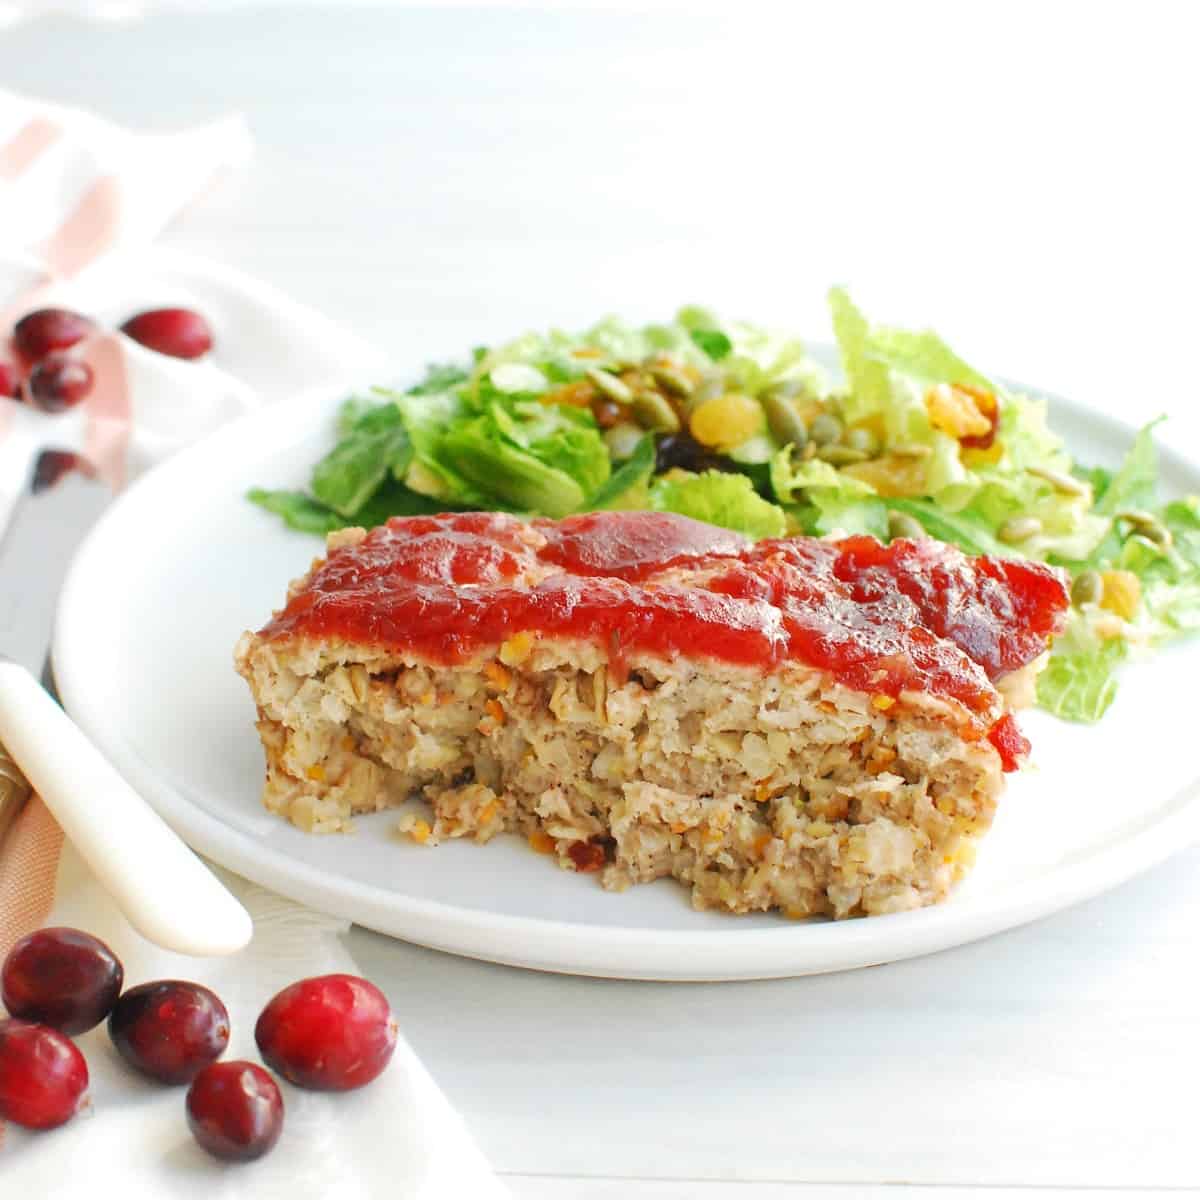 Cranberry Turkey Meatloaf - Awesome on 20